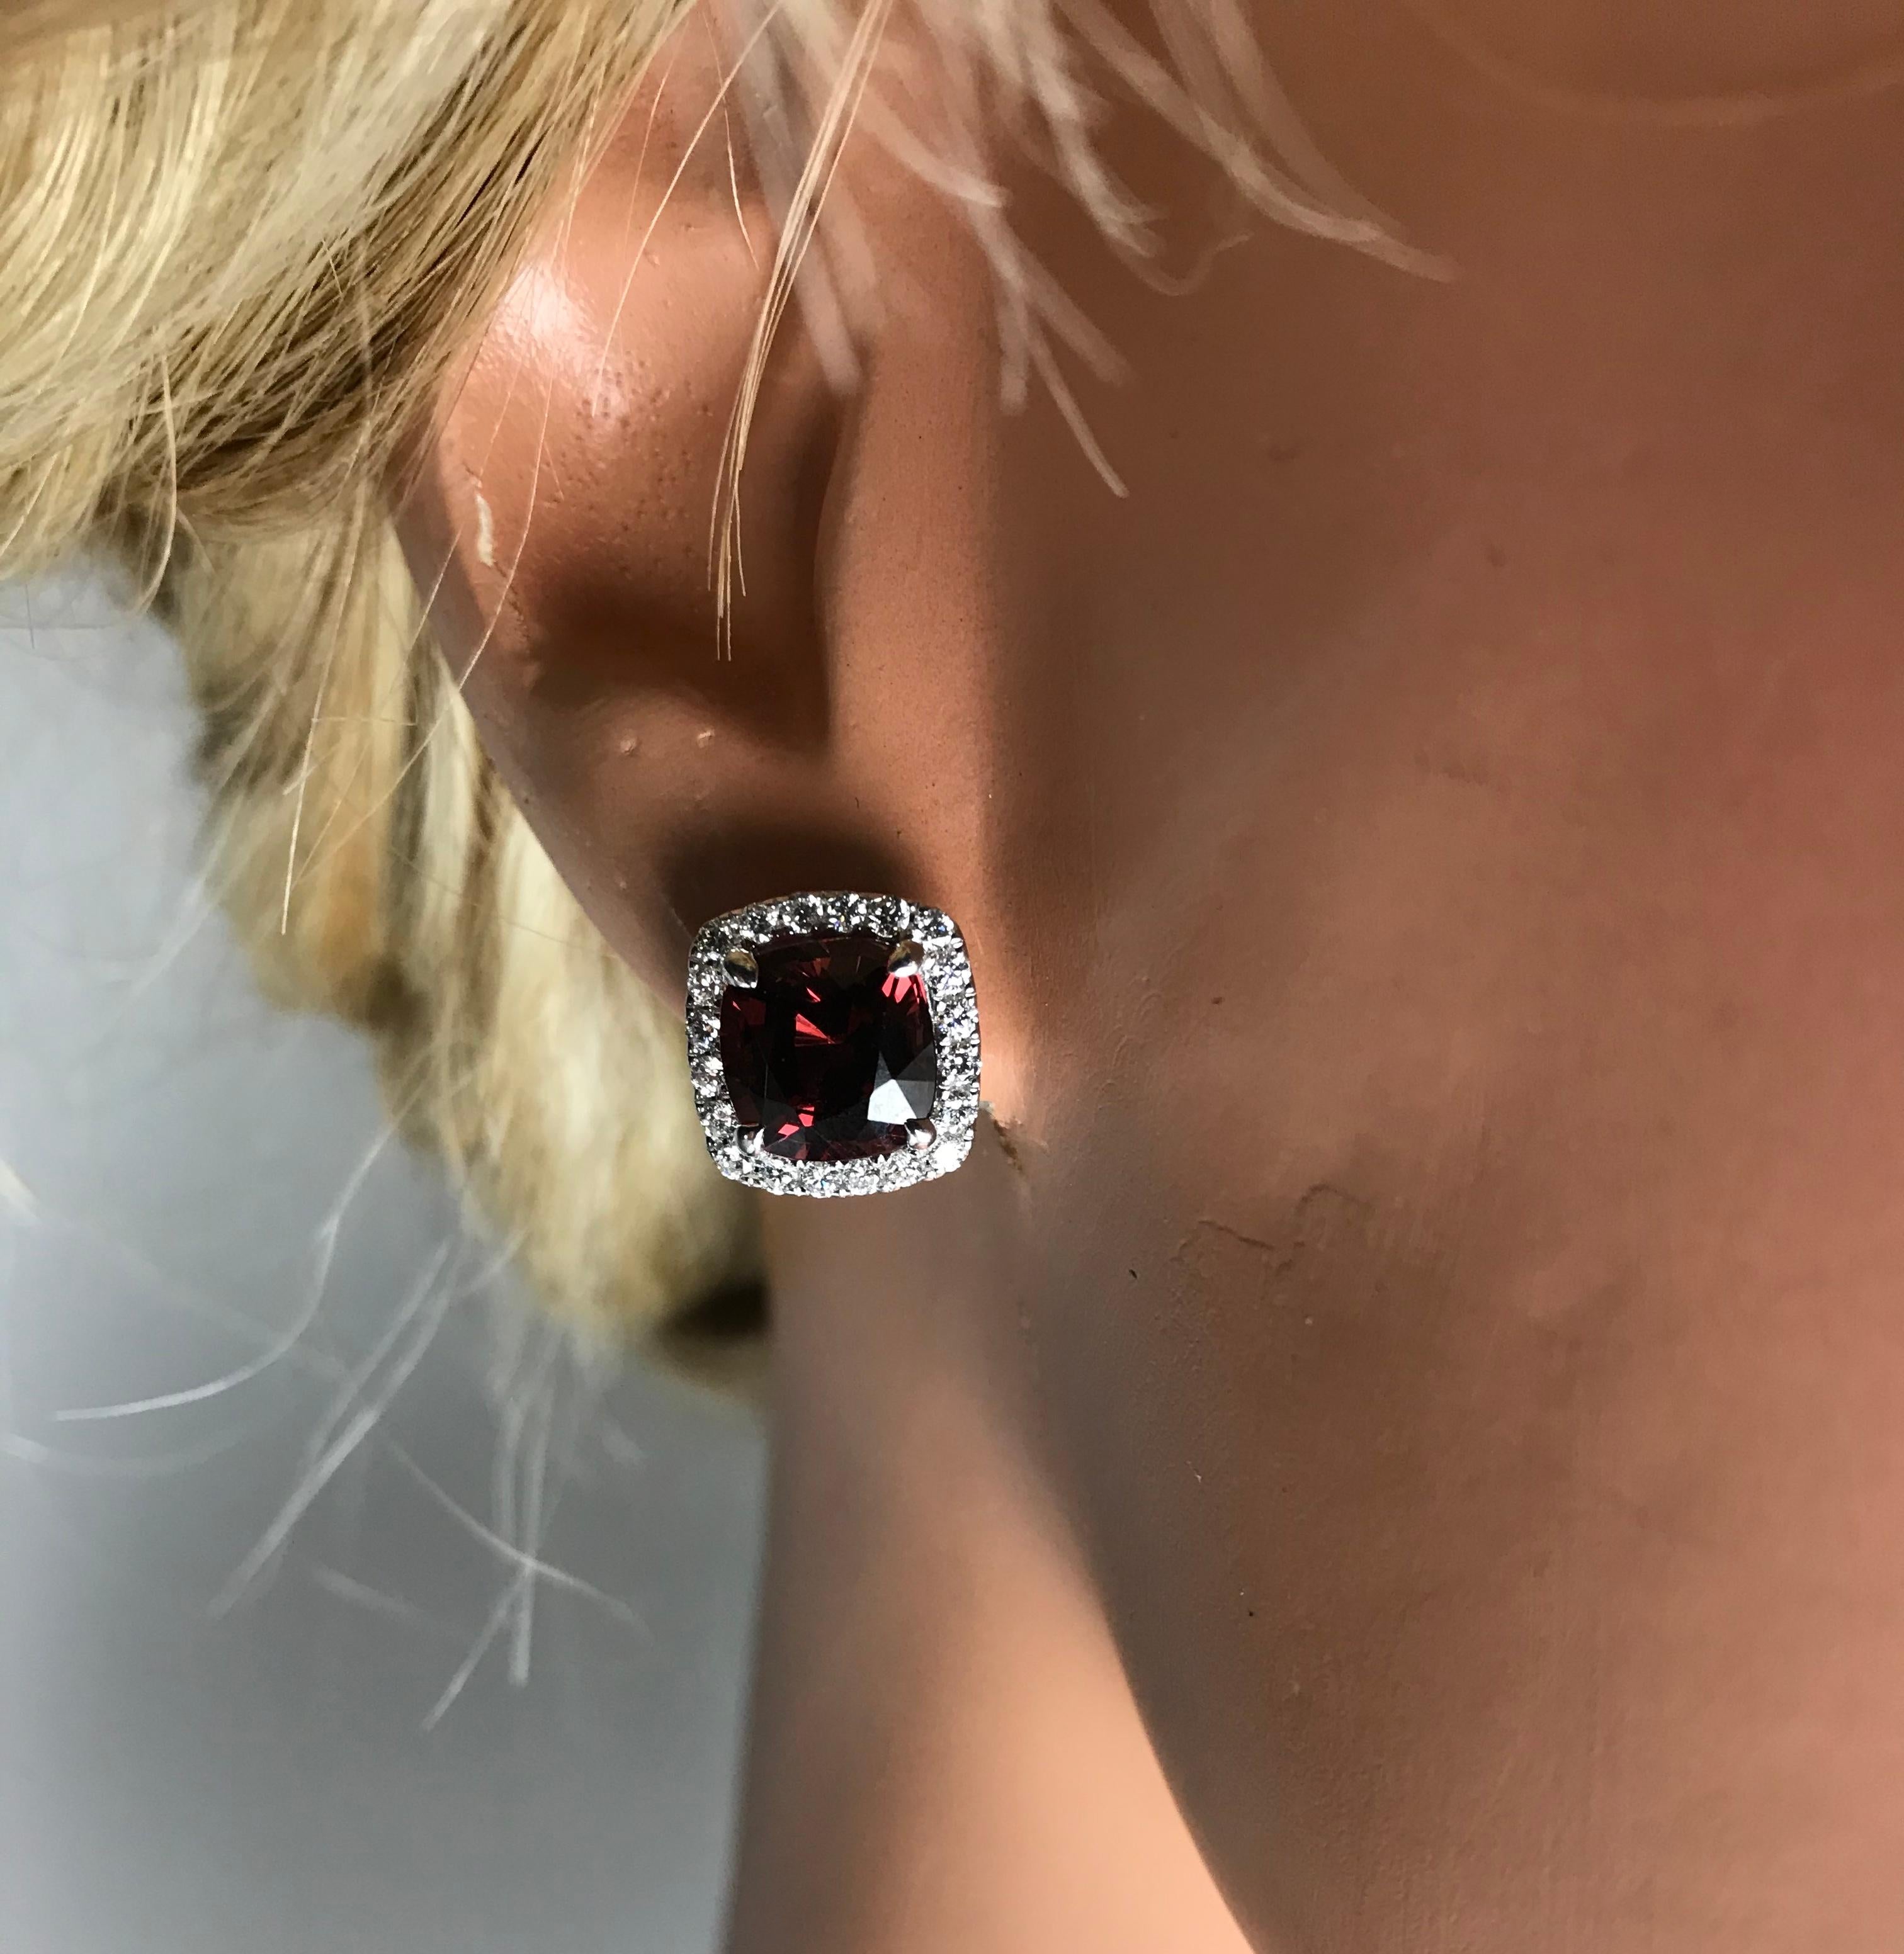 7.29 Ct Cushion Cut Garnet Earrings with Natural Diamond Halo in 18W ref1057 In New Condition For Sale In New York, NY